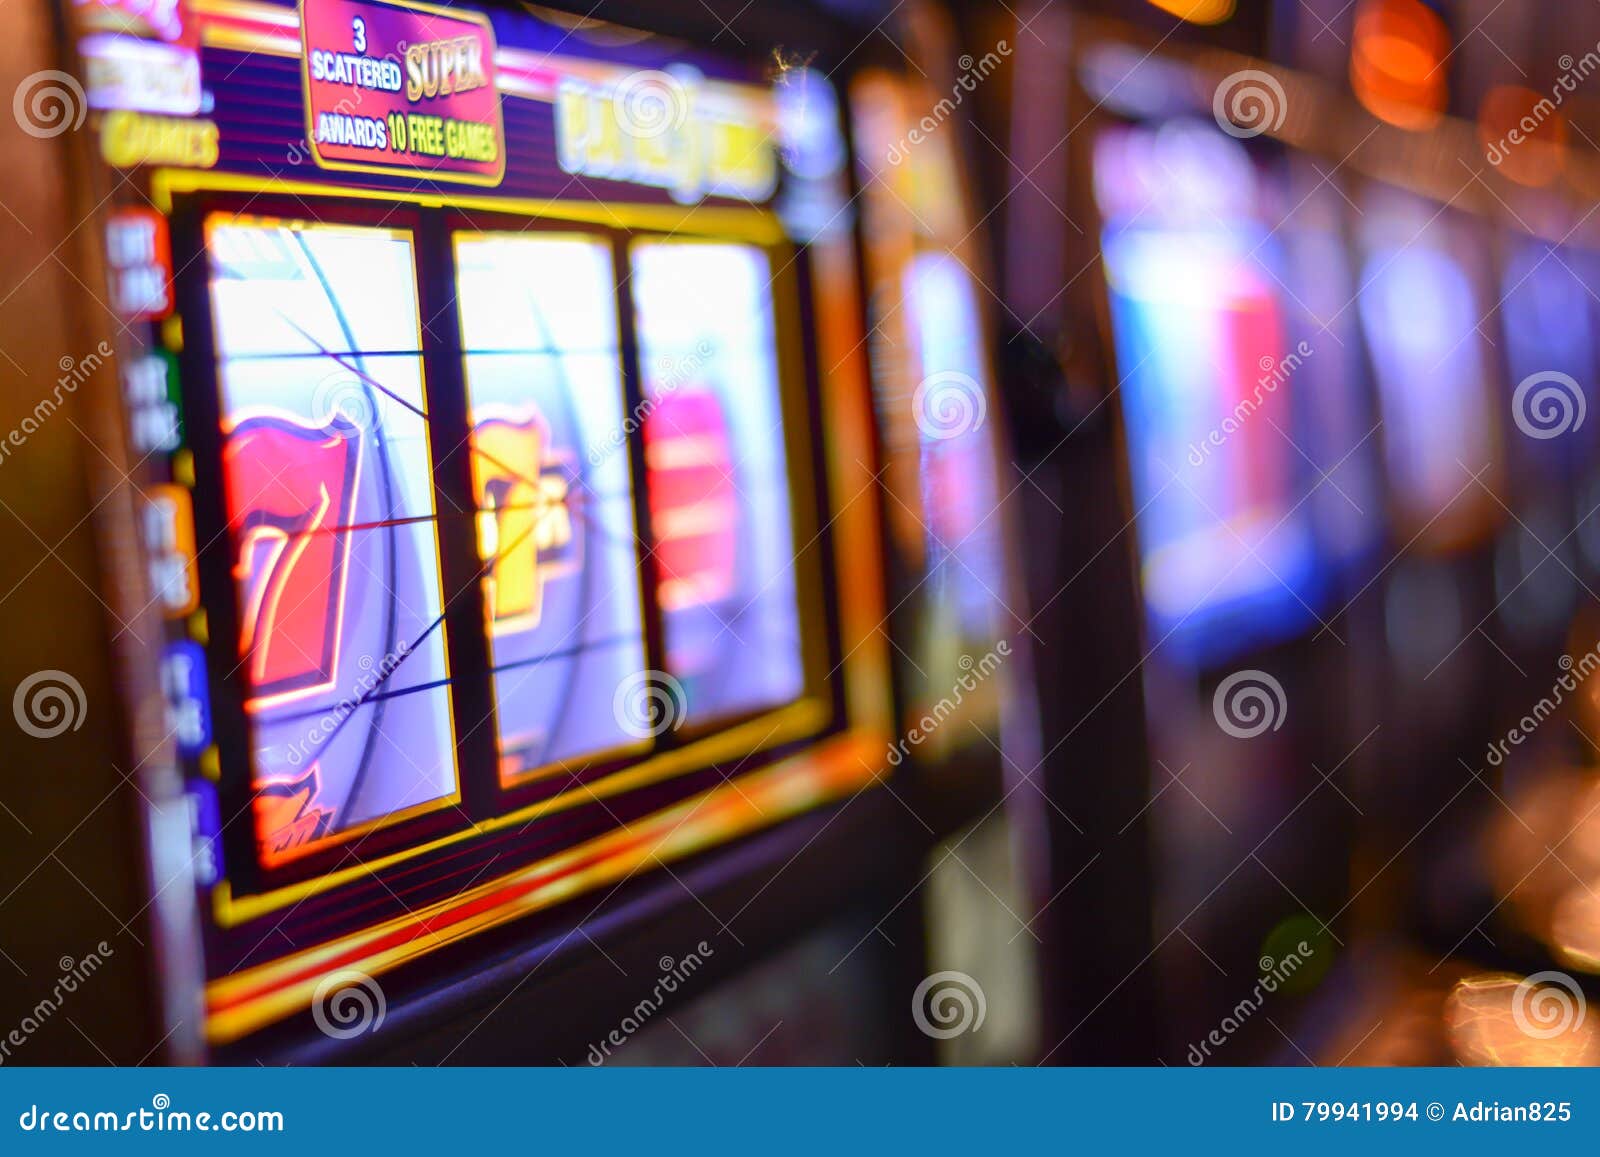 How to find a winning slot machine in vegas